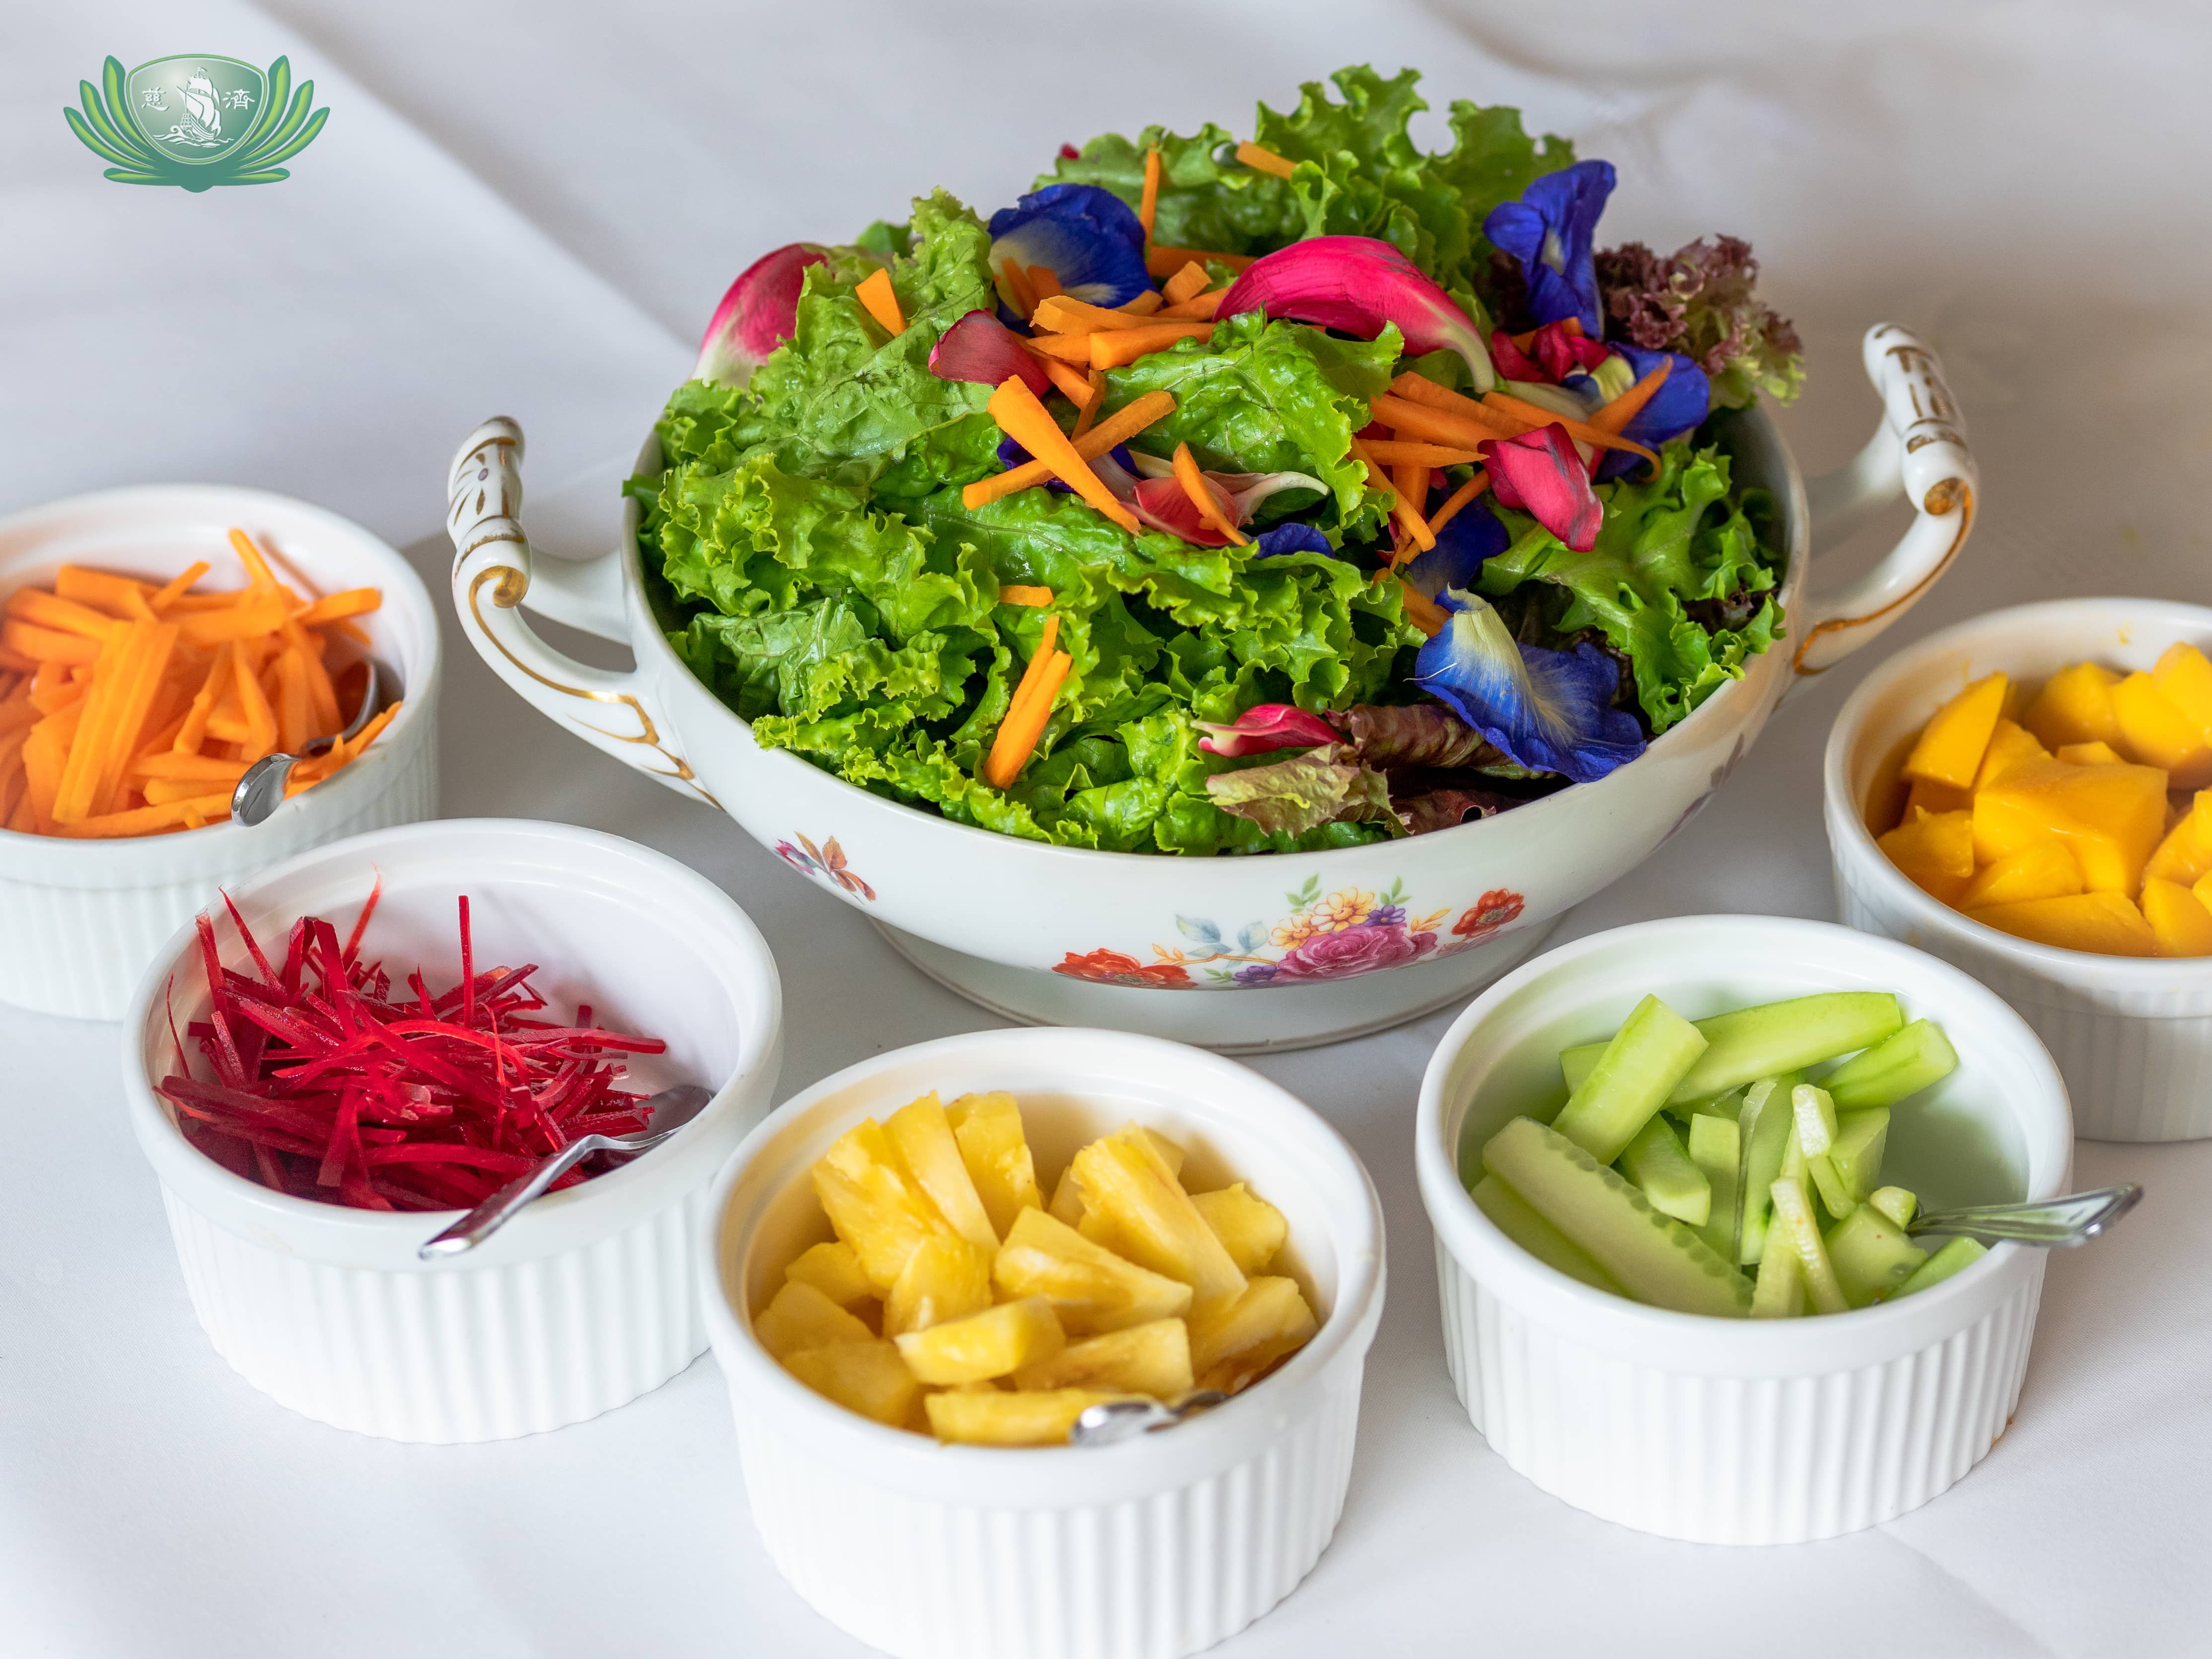 Sonya's staple green salad with edible flowers,【Photo by Daniel Lazar】